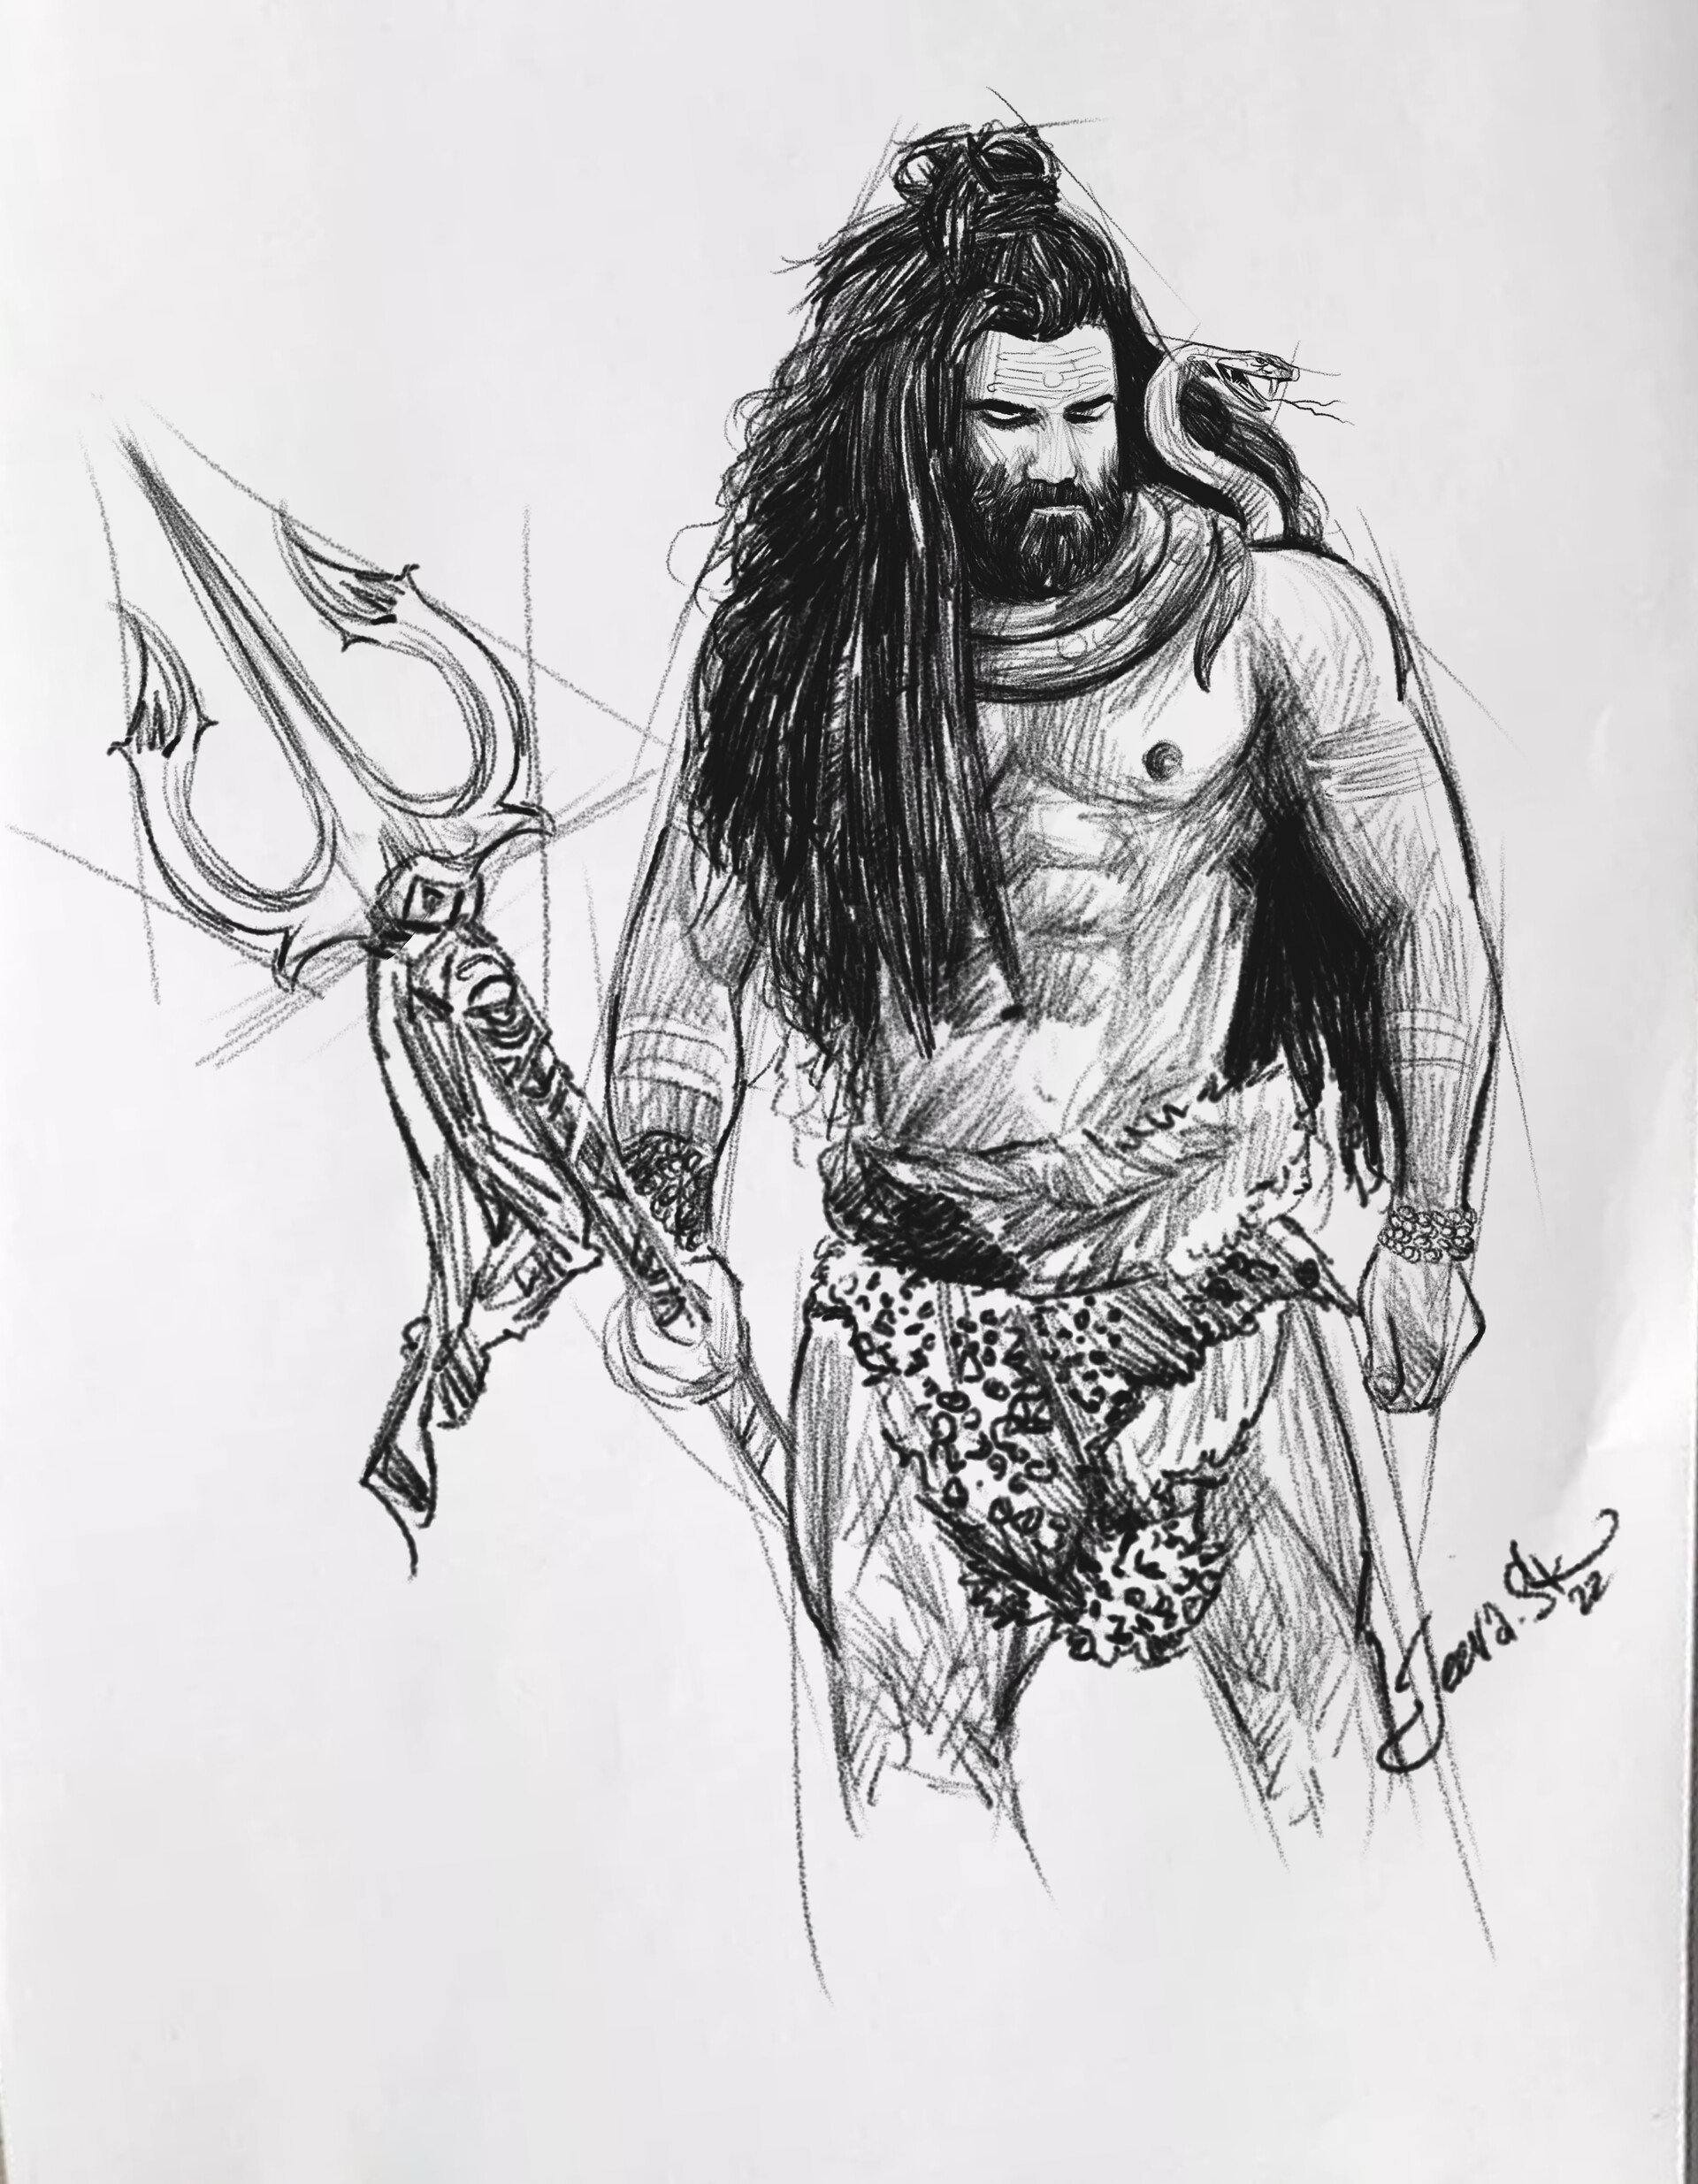 How to draw lord shiva sketch with paper and pencil || art 9 god shiva art  - video Dailymotion